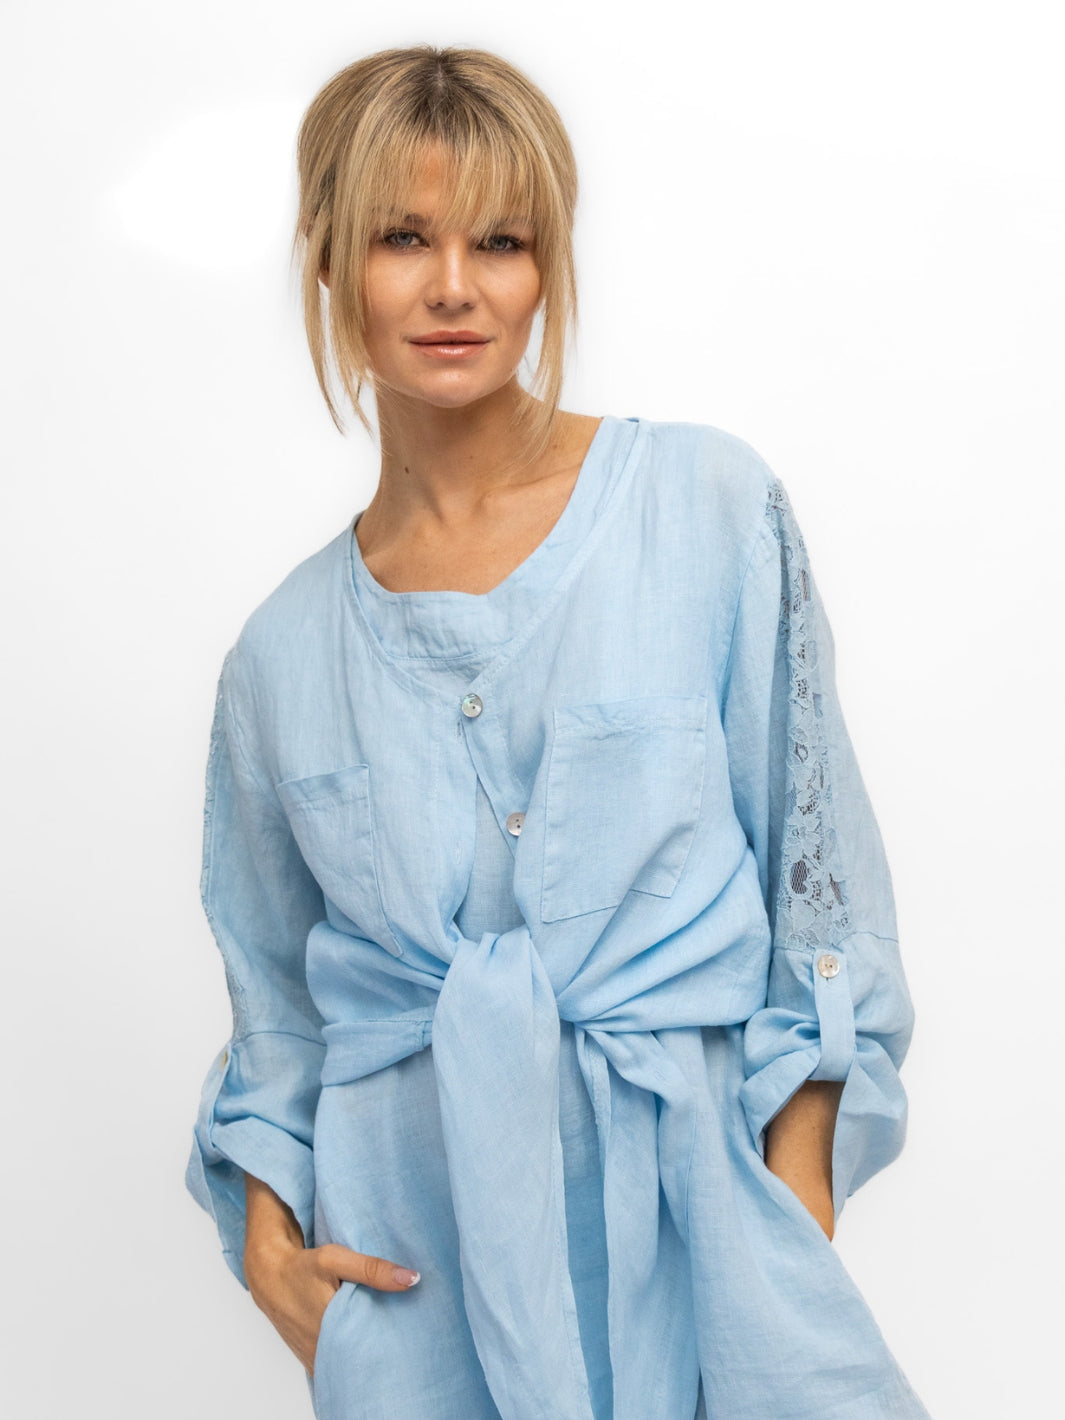 Diffusion by Kate Shirt One Size Linen Shirt with Lace Insert in Blue